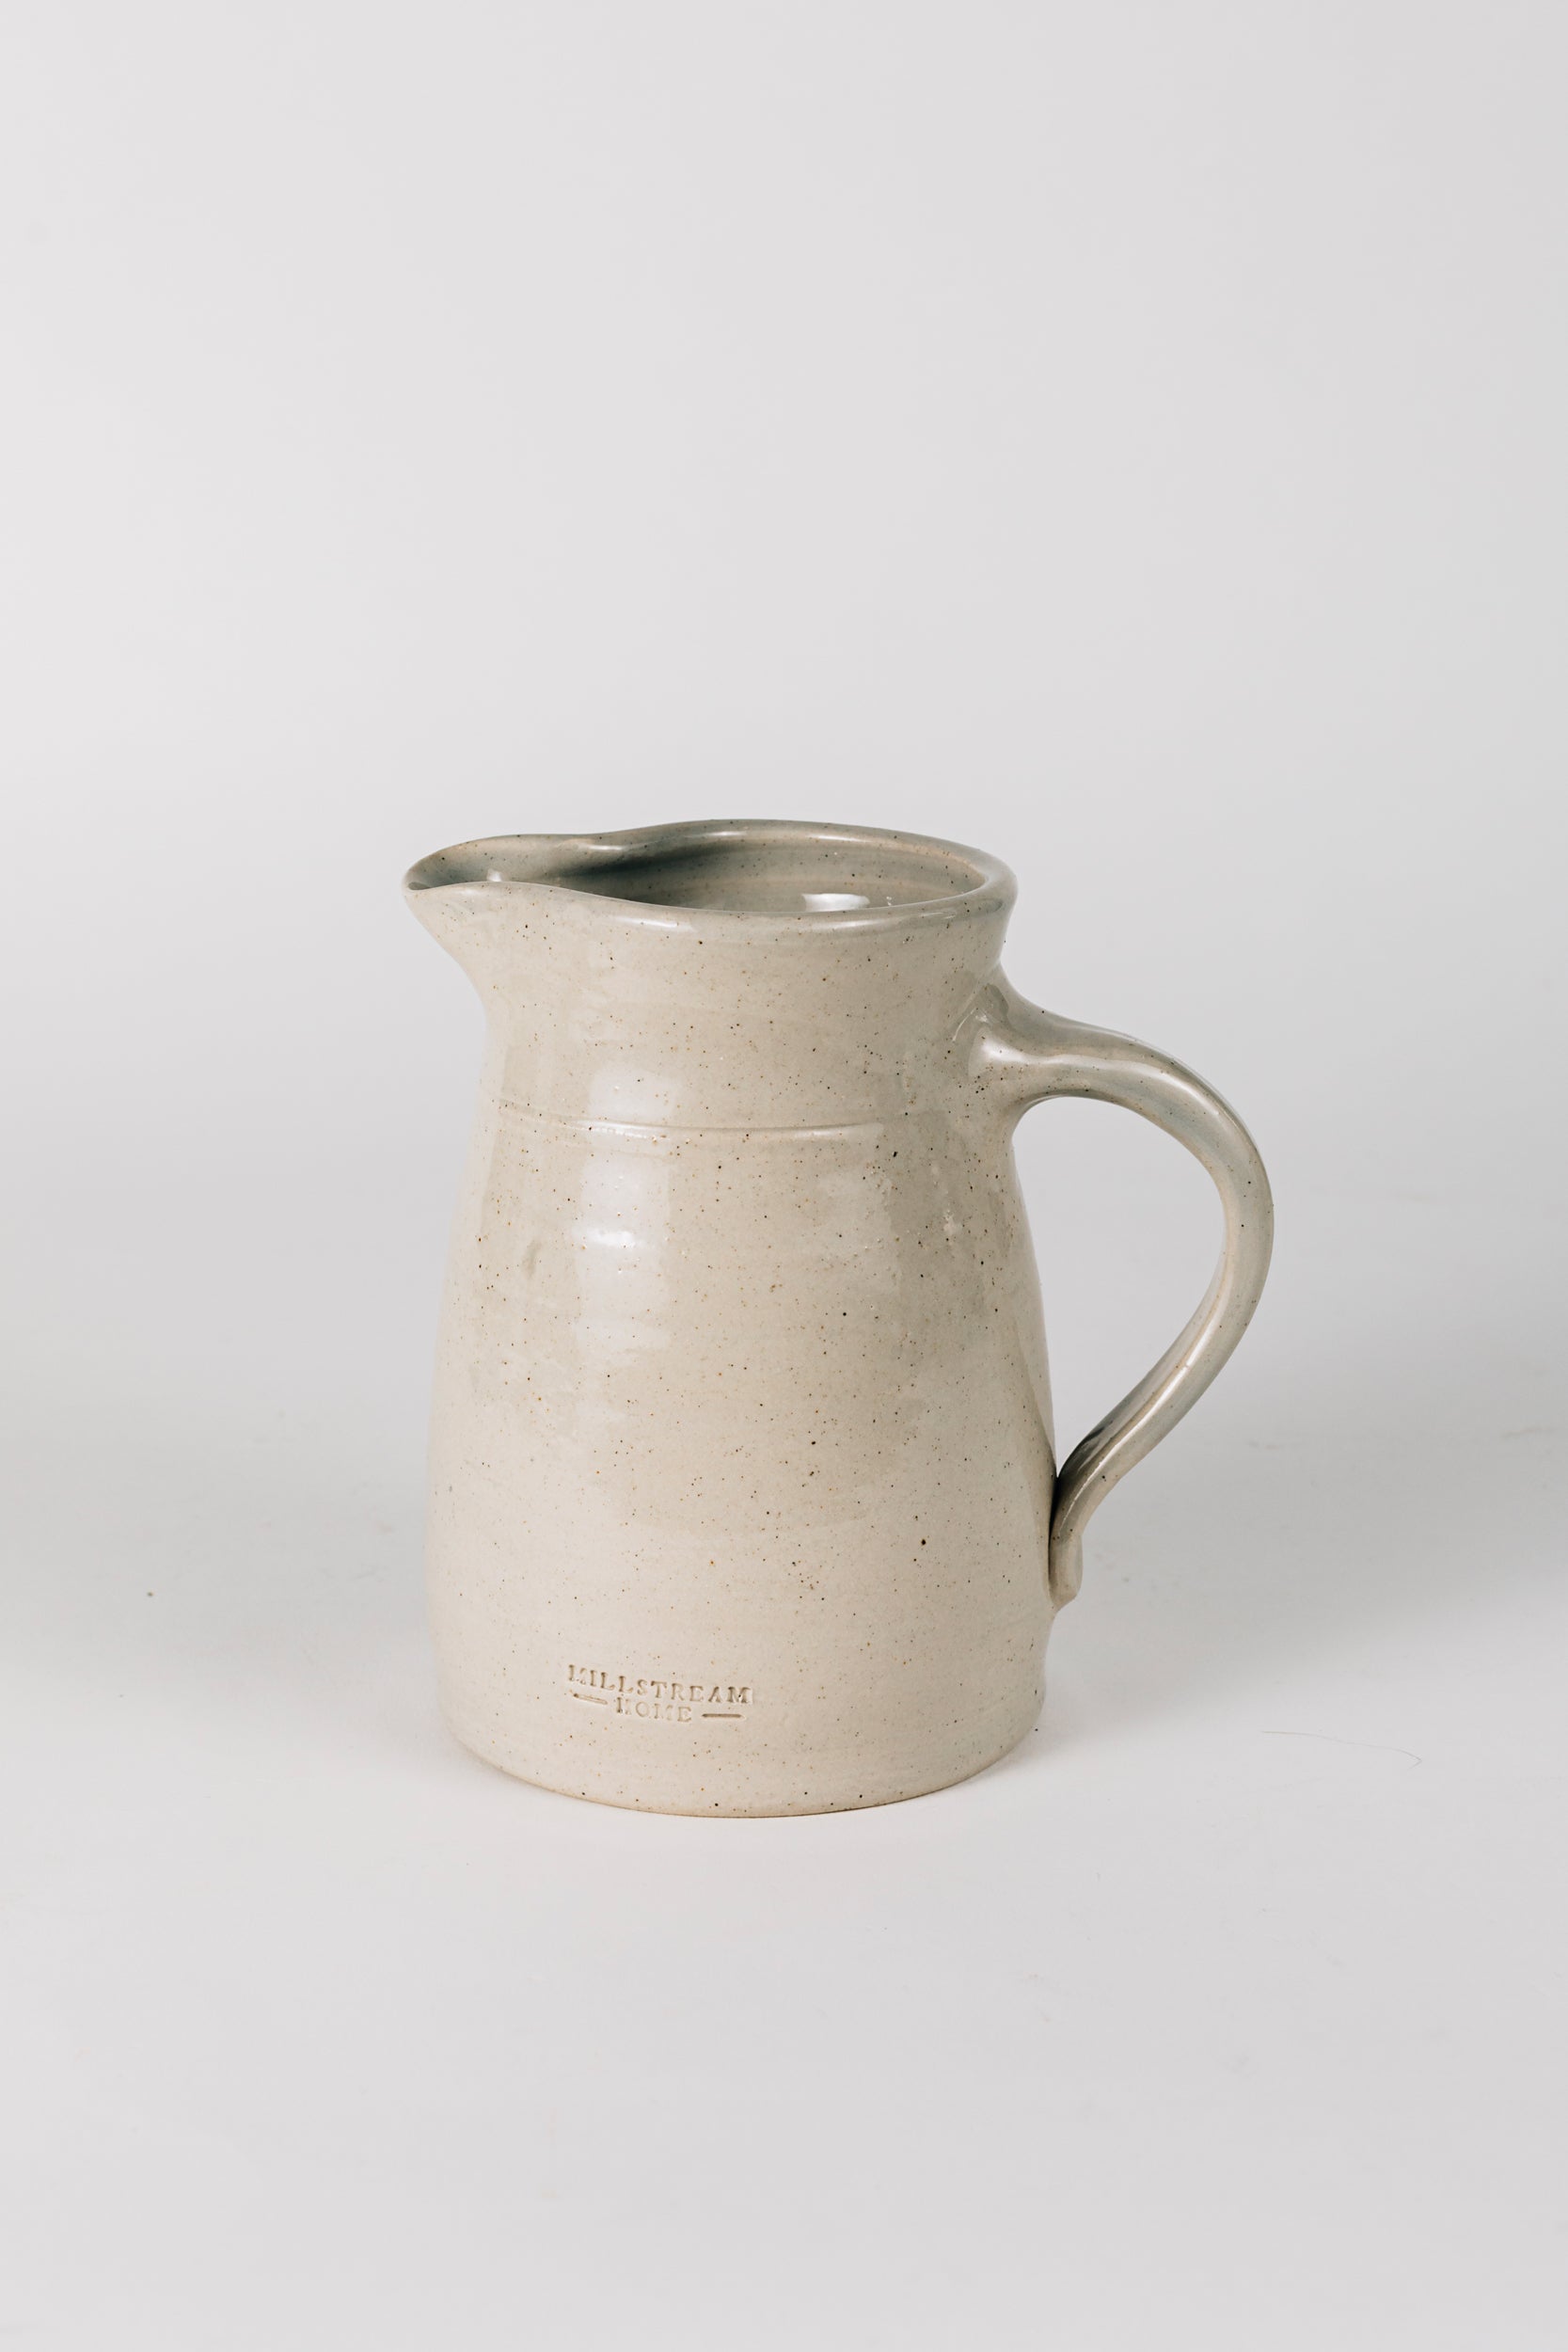 The Hand-Thrown Pitcher